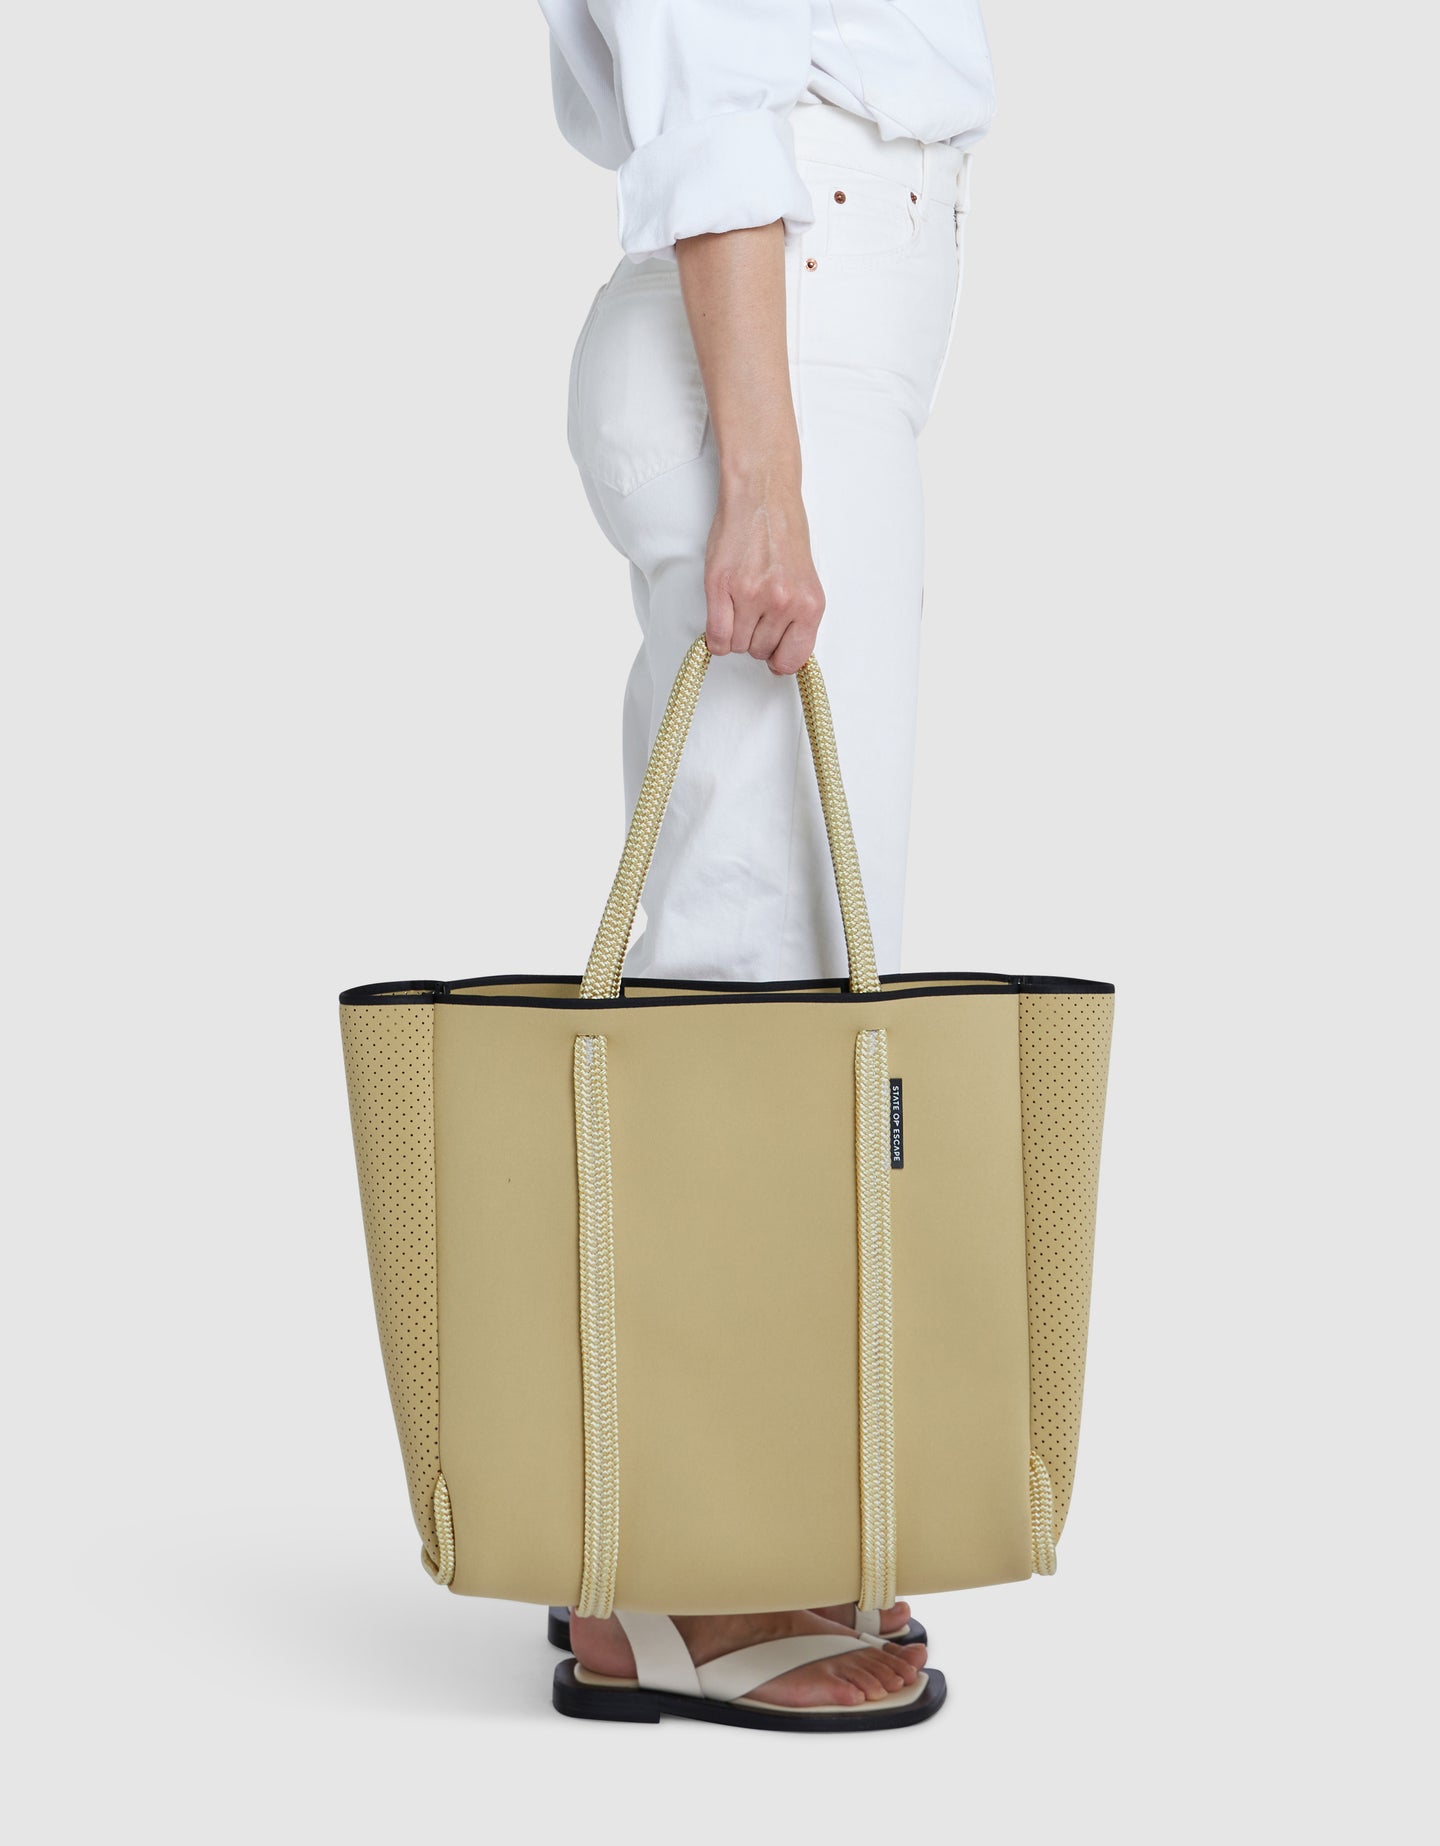 Satellite City tote in Washed Gold - State of Escape